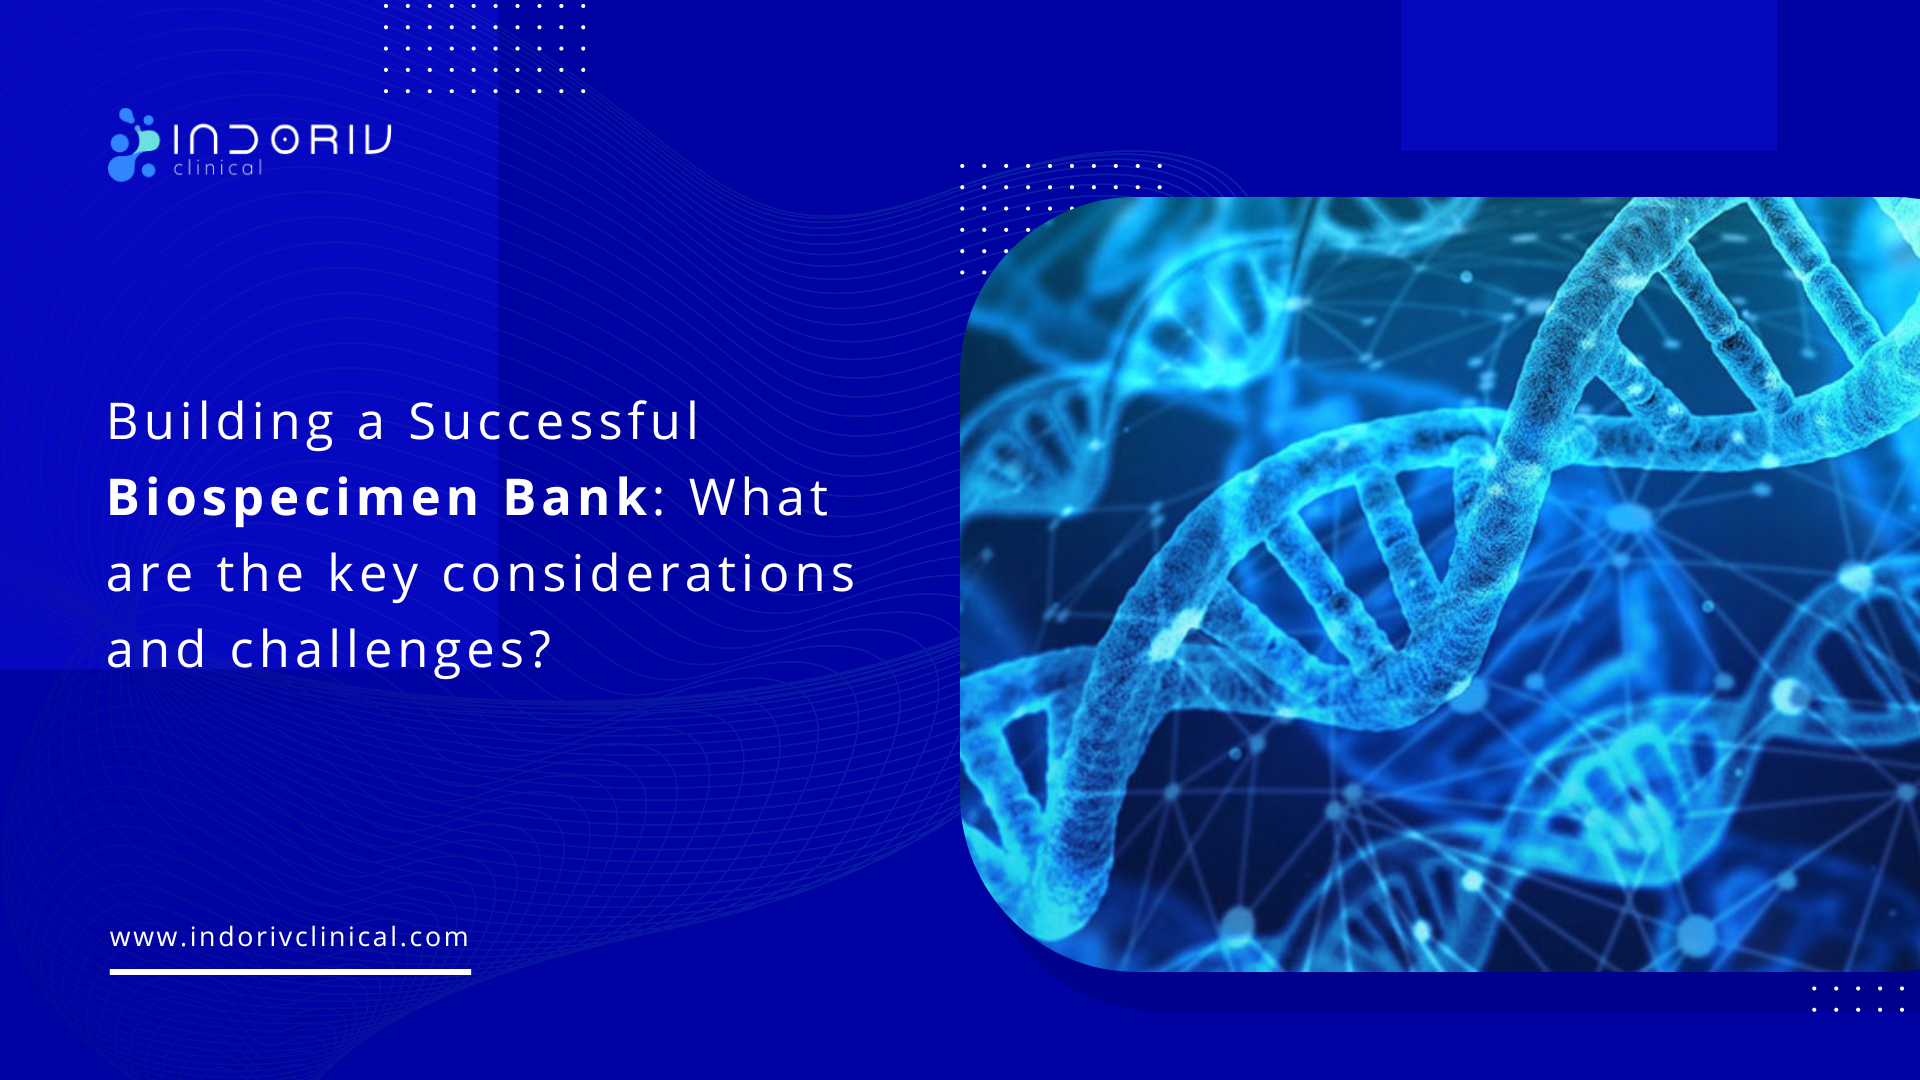 Building a Successful Biospecimen Bank What are the key considerations and challenges